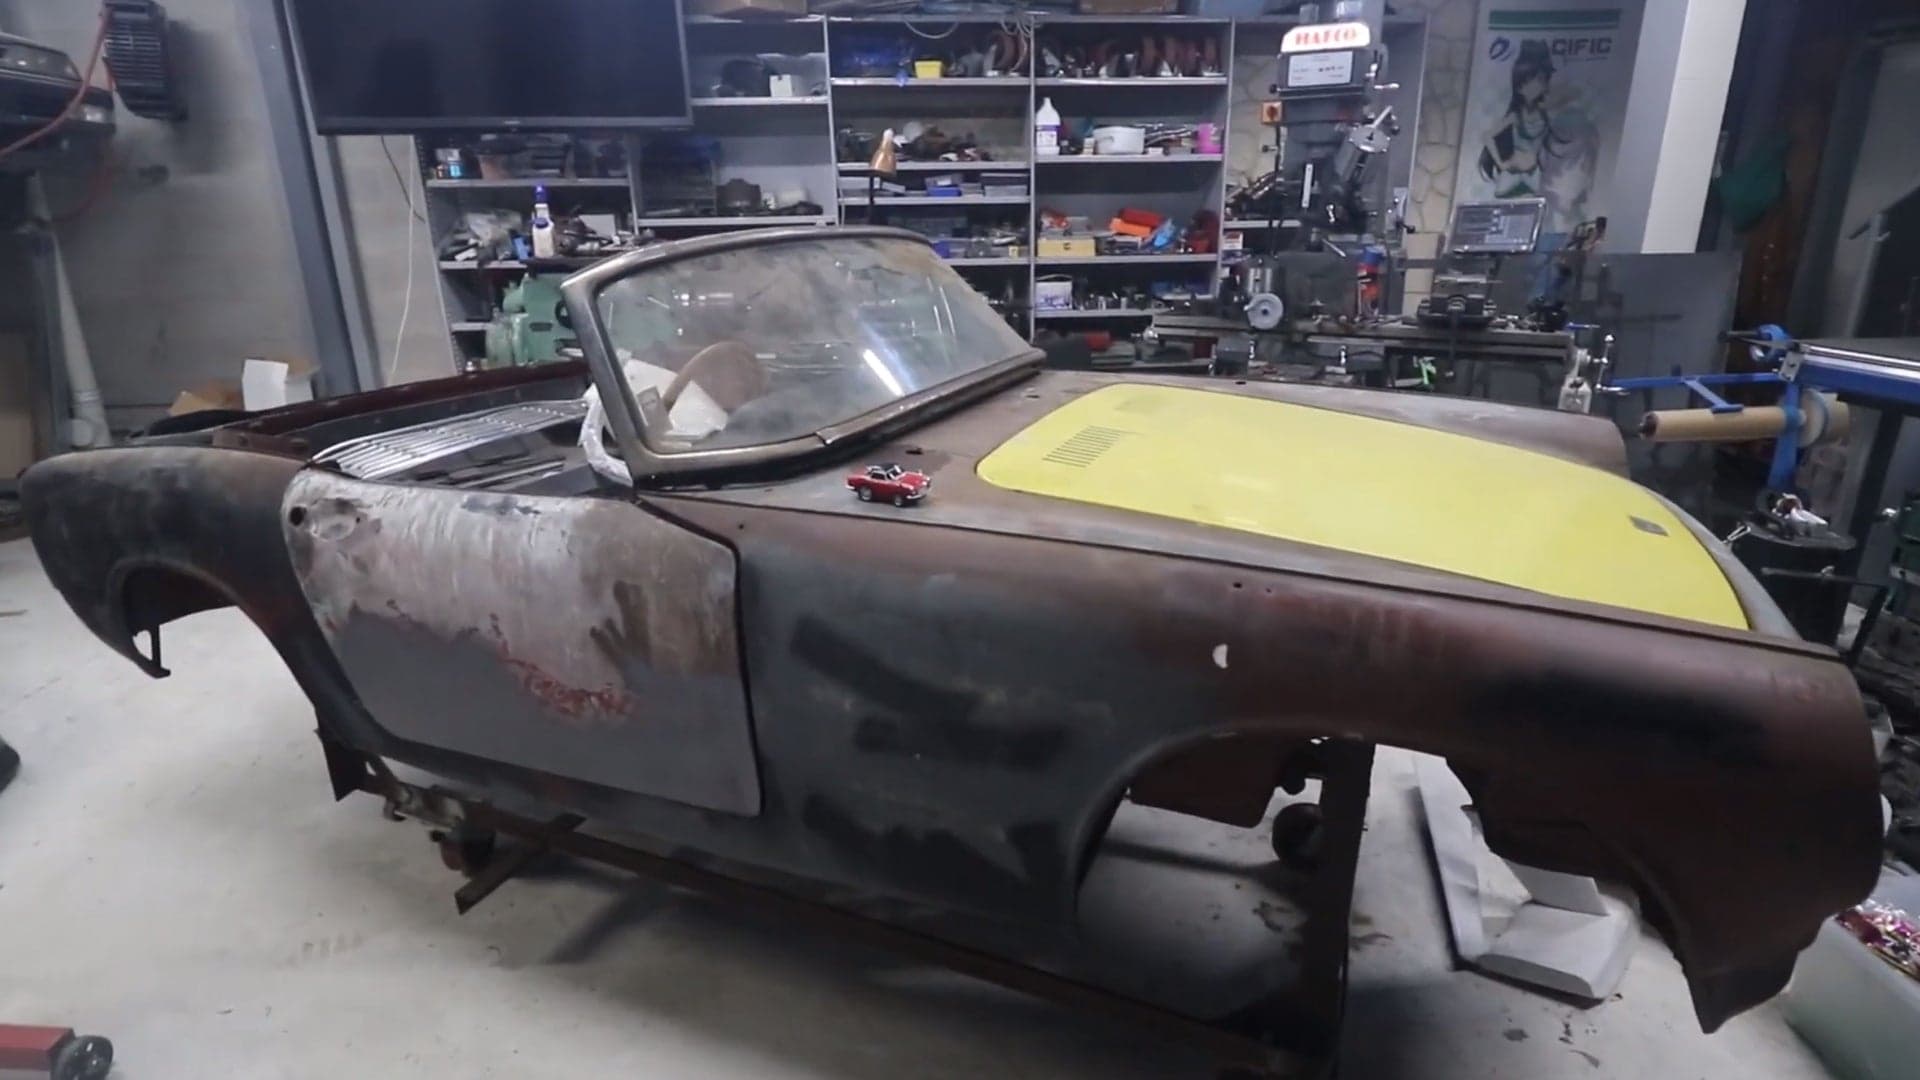 YouTuber’s Honda S600 Restoration Project Is a Fascinating Peek at Honda’s First Production Car